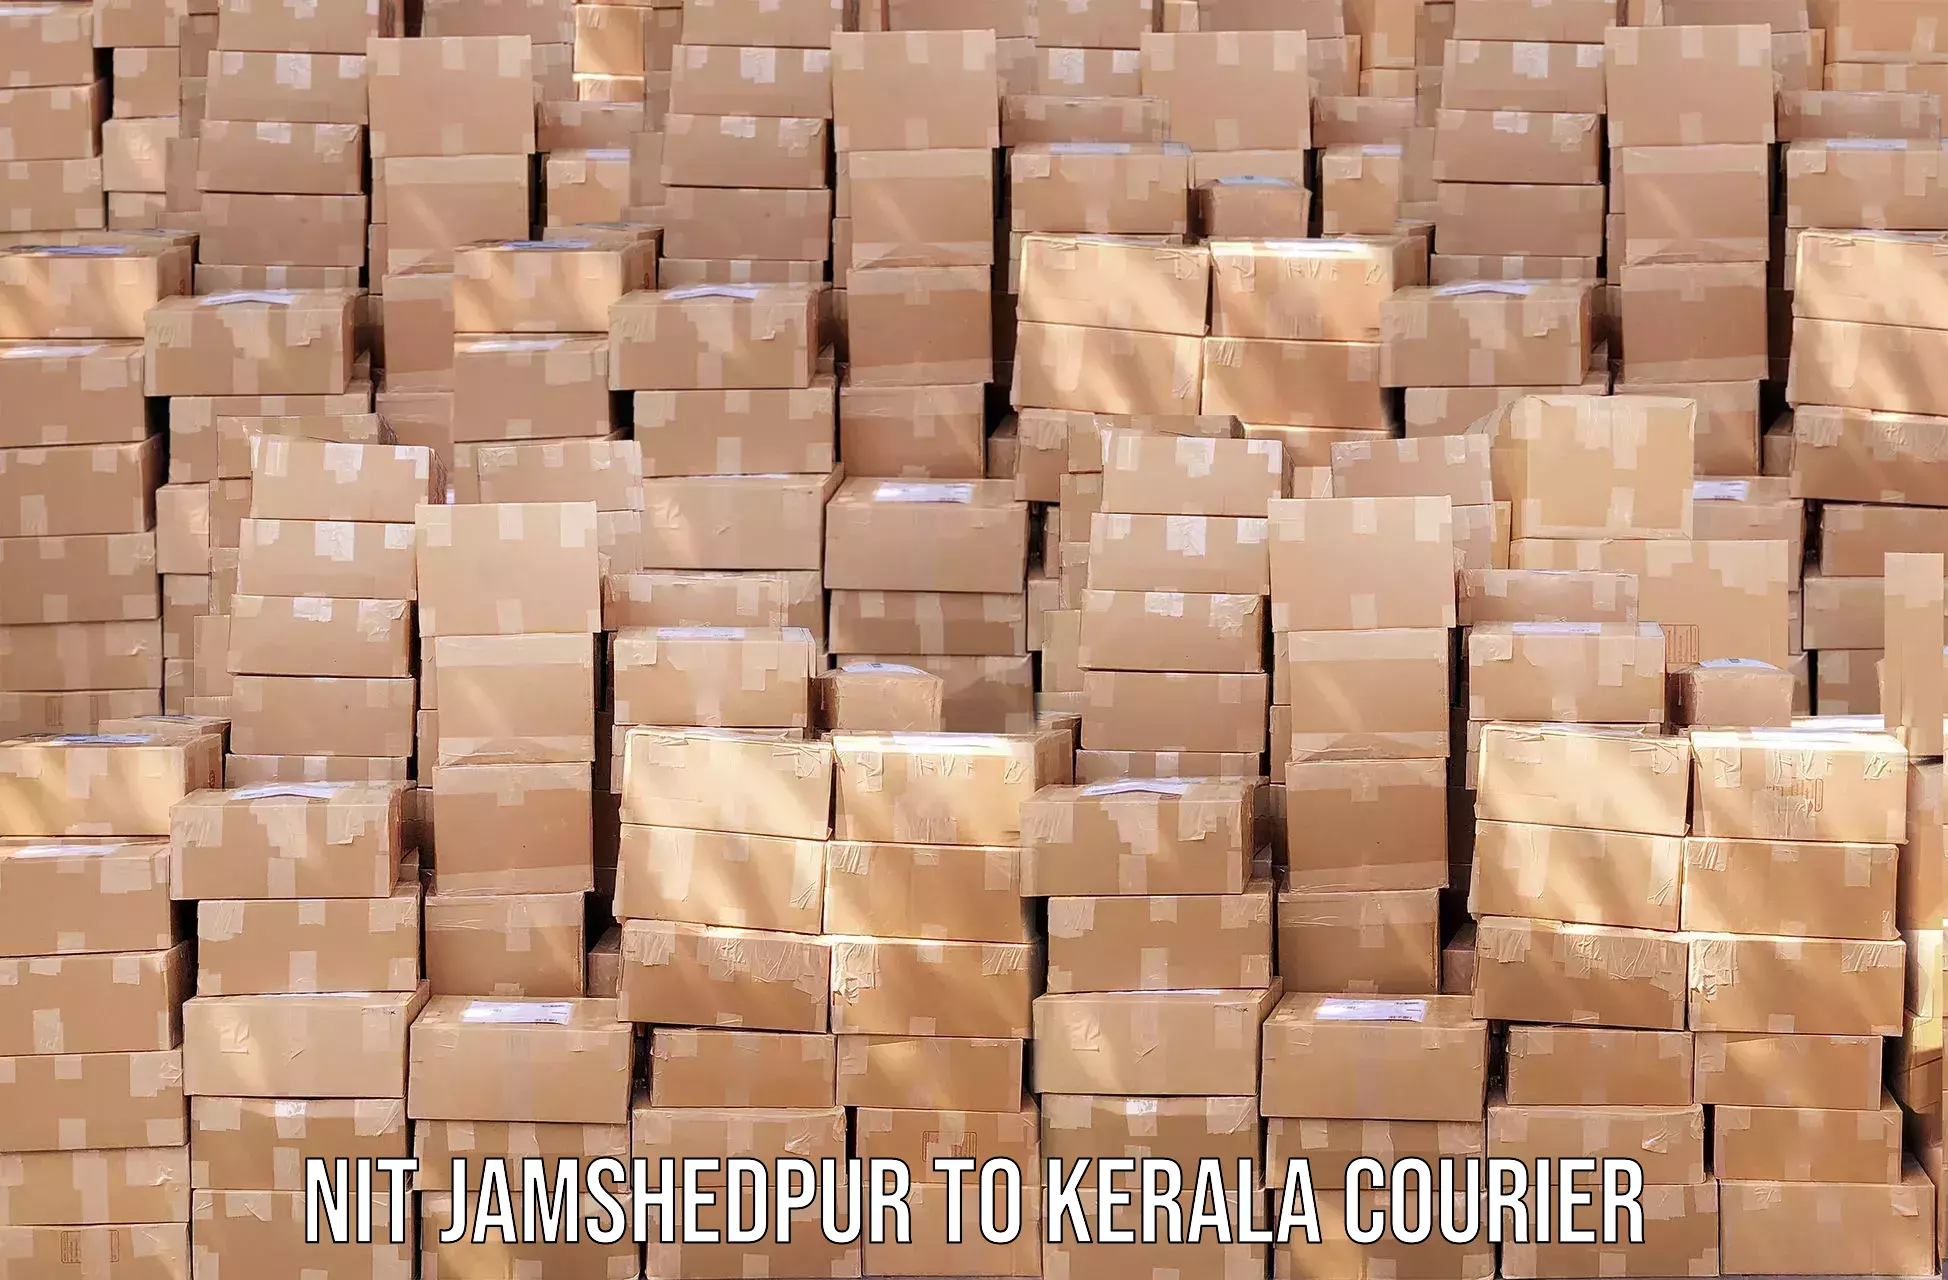 Reliable courier service NIT Jamshedpur to Wayanad